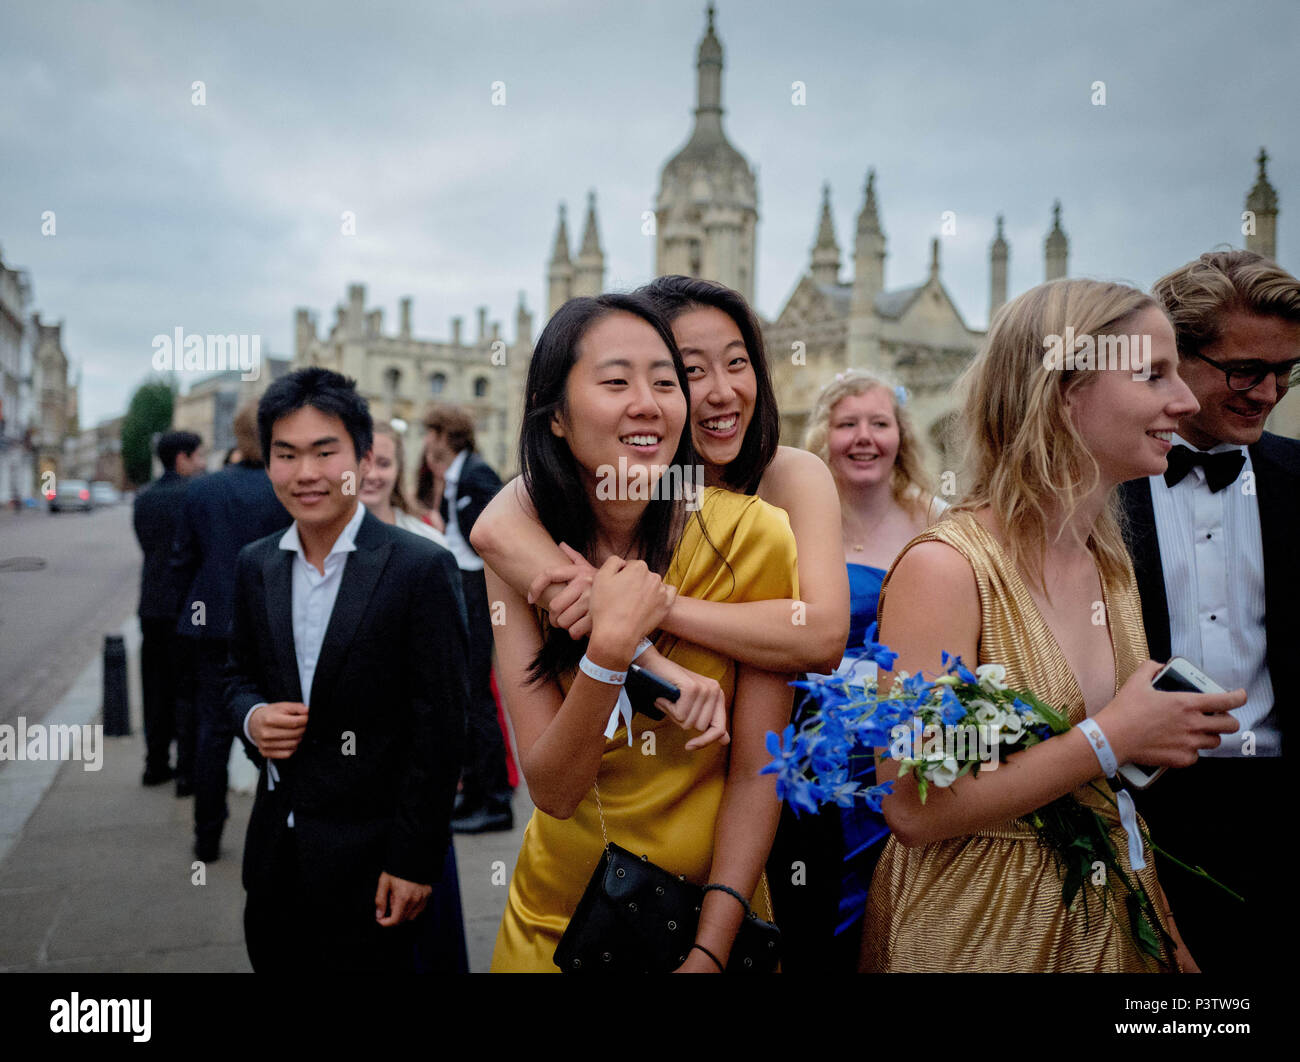 Cambridge, UK. 19th June, 2018. Trinity College Cambridge May Ball. Cambridge University students walk the streets of Cambridge after attending the Trinity College May Ball.  Picture by Andrew Parsons / Parsons Media Credit: andrew parsons/Alamy Live News Stock Photo